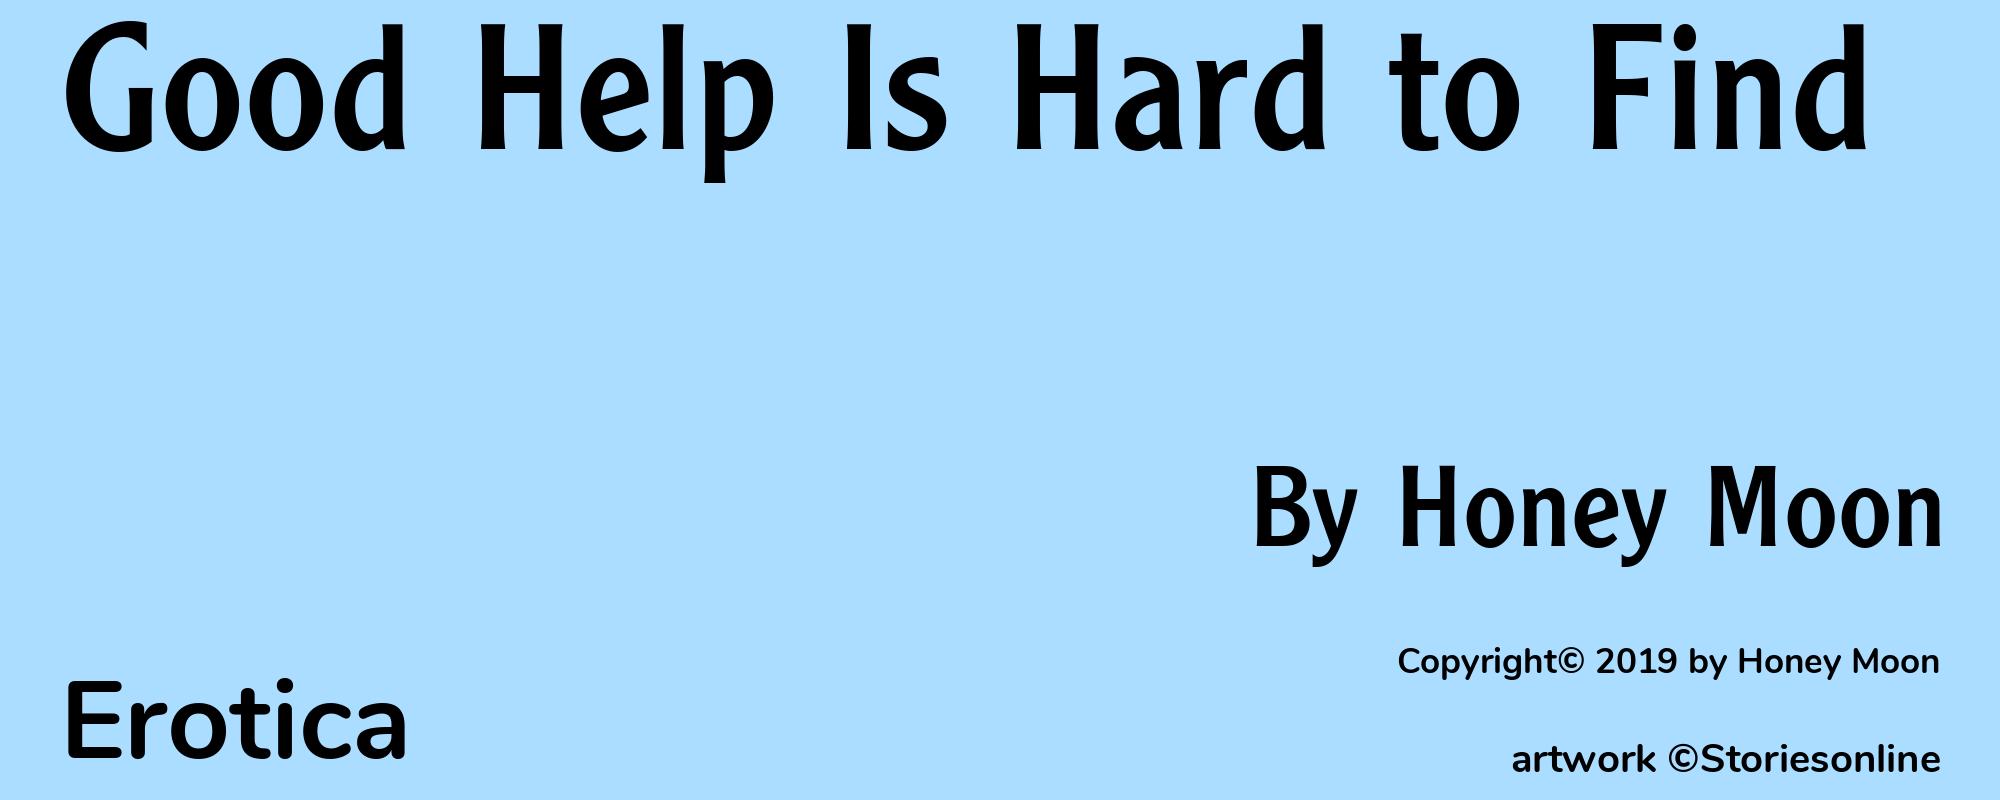 Good Help Is Hard to Find - Cover